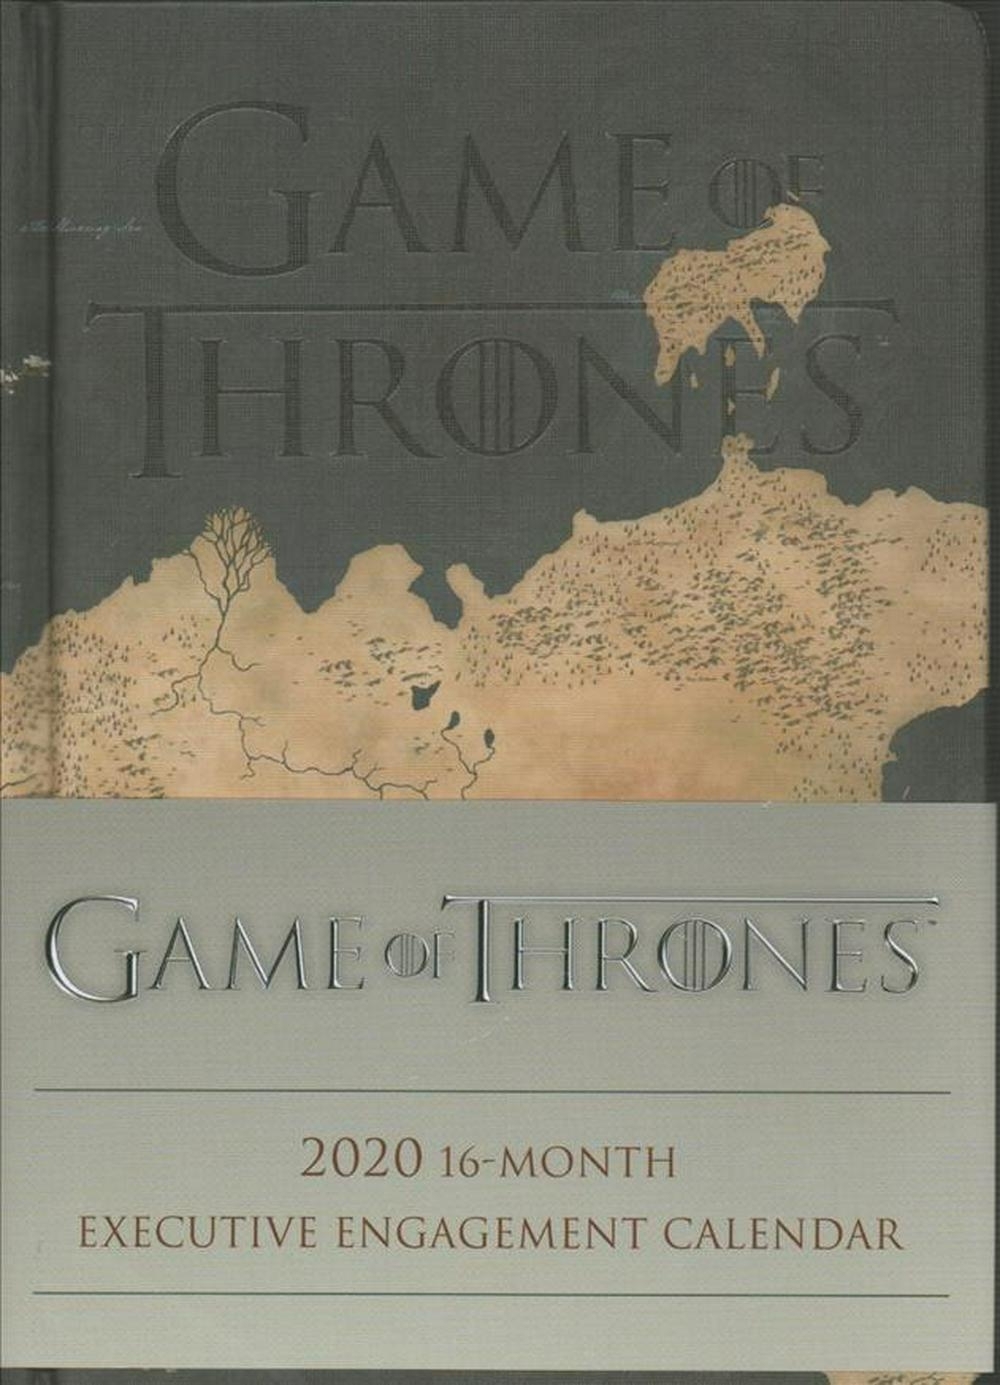 Game Of Thrones 2020 16-Month Executive Engagement Calendar